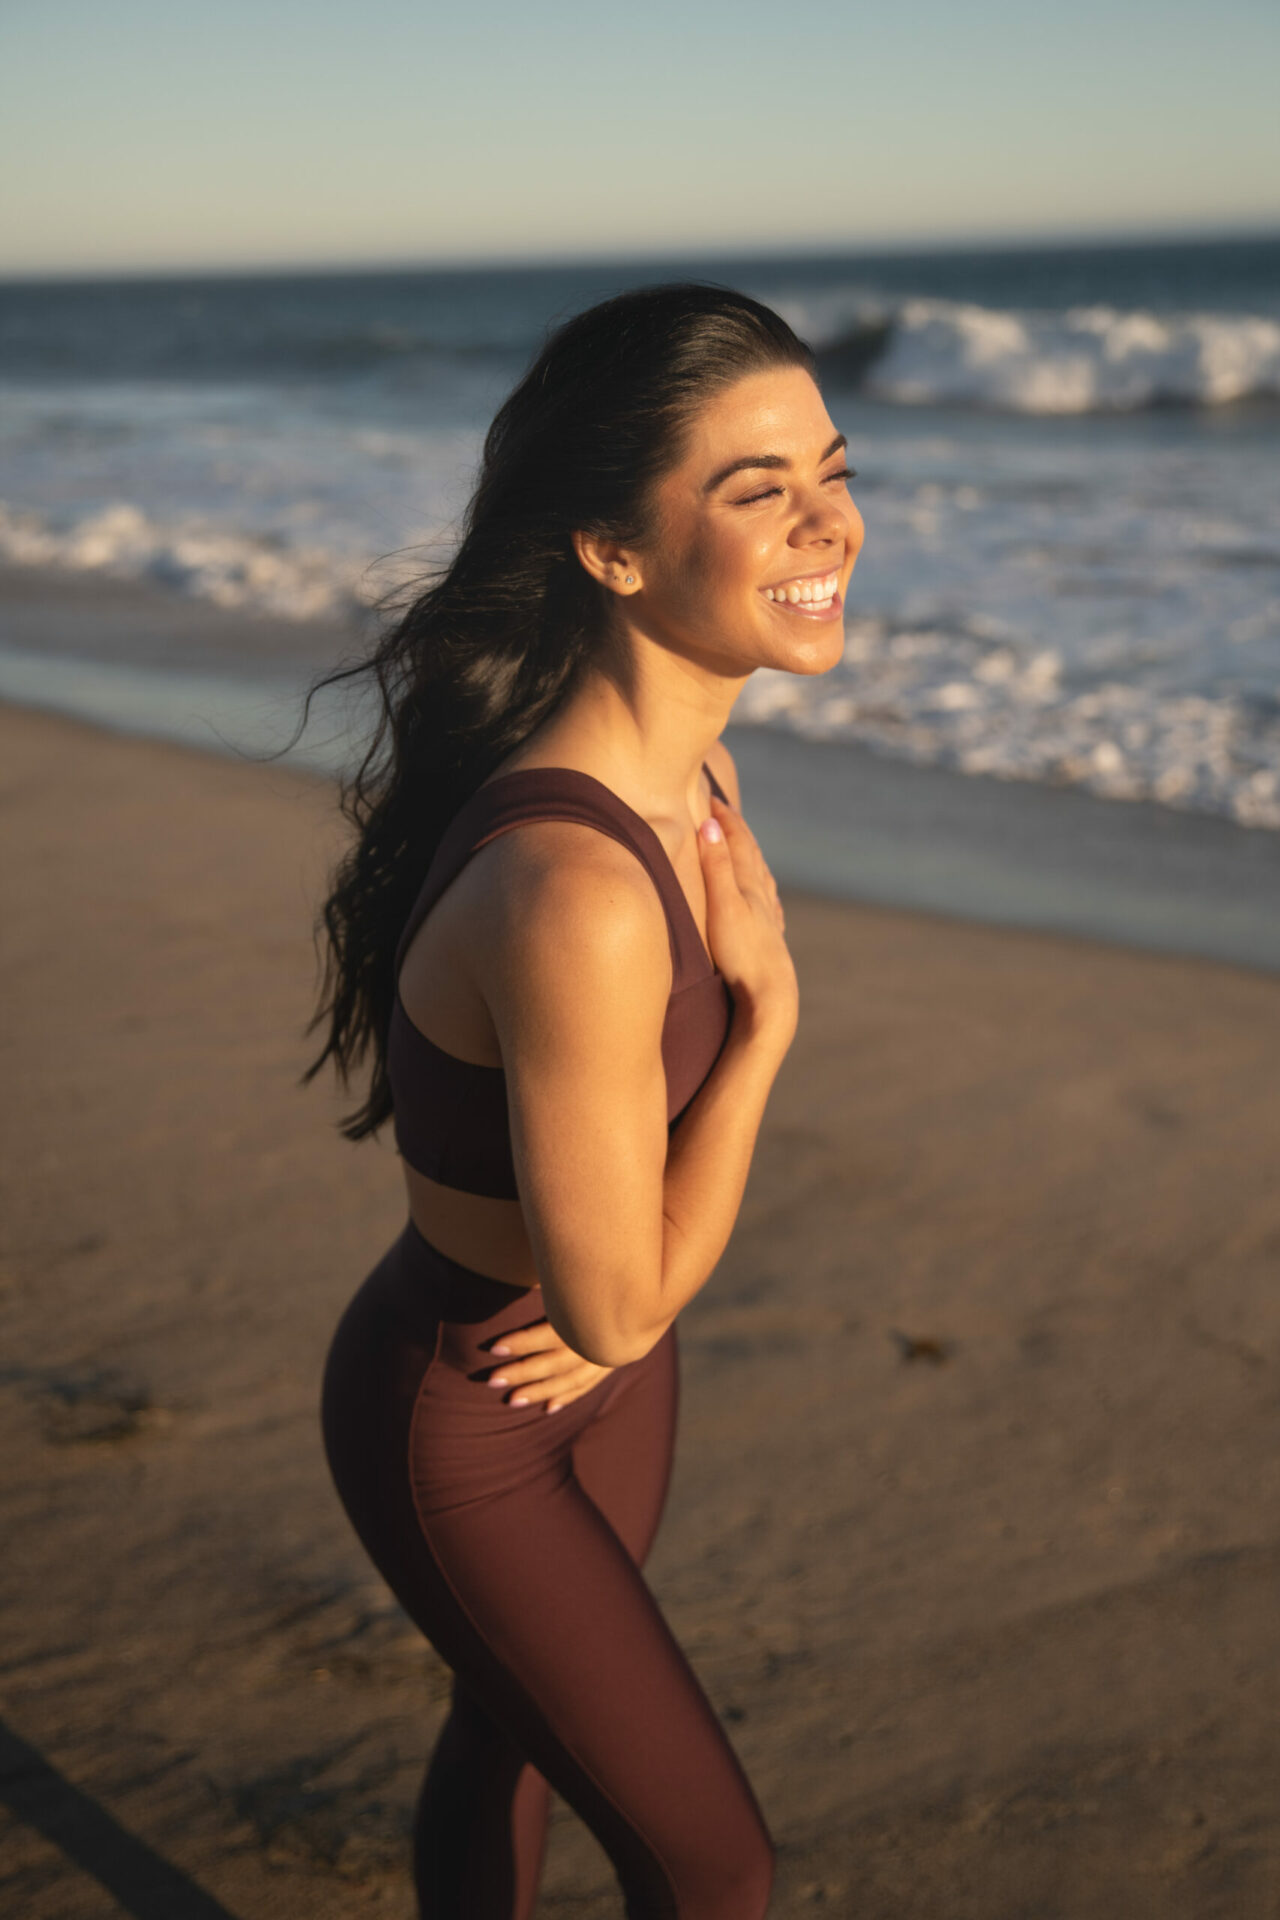 Gabby Sansosti in Malibu California on the beach next to the ocean in fitness set with her hand to her heart and a big smile full of joy as sunset is shining on her